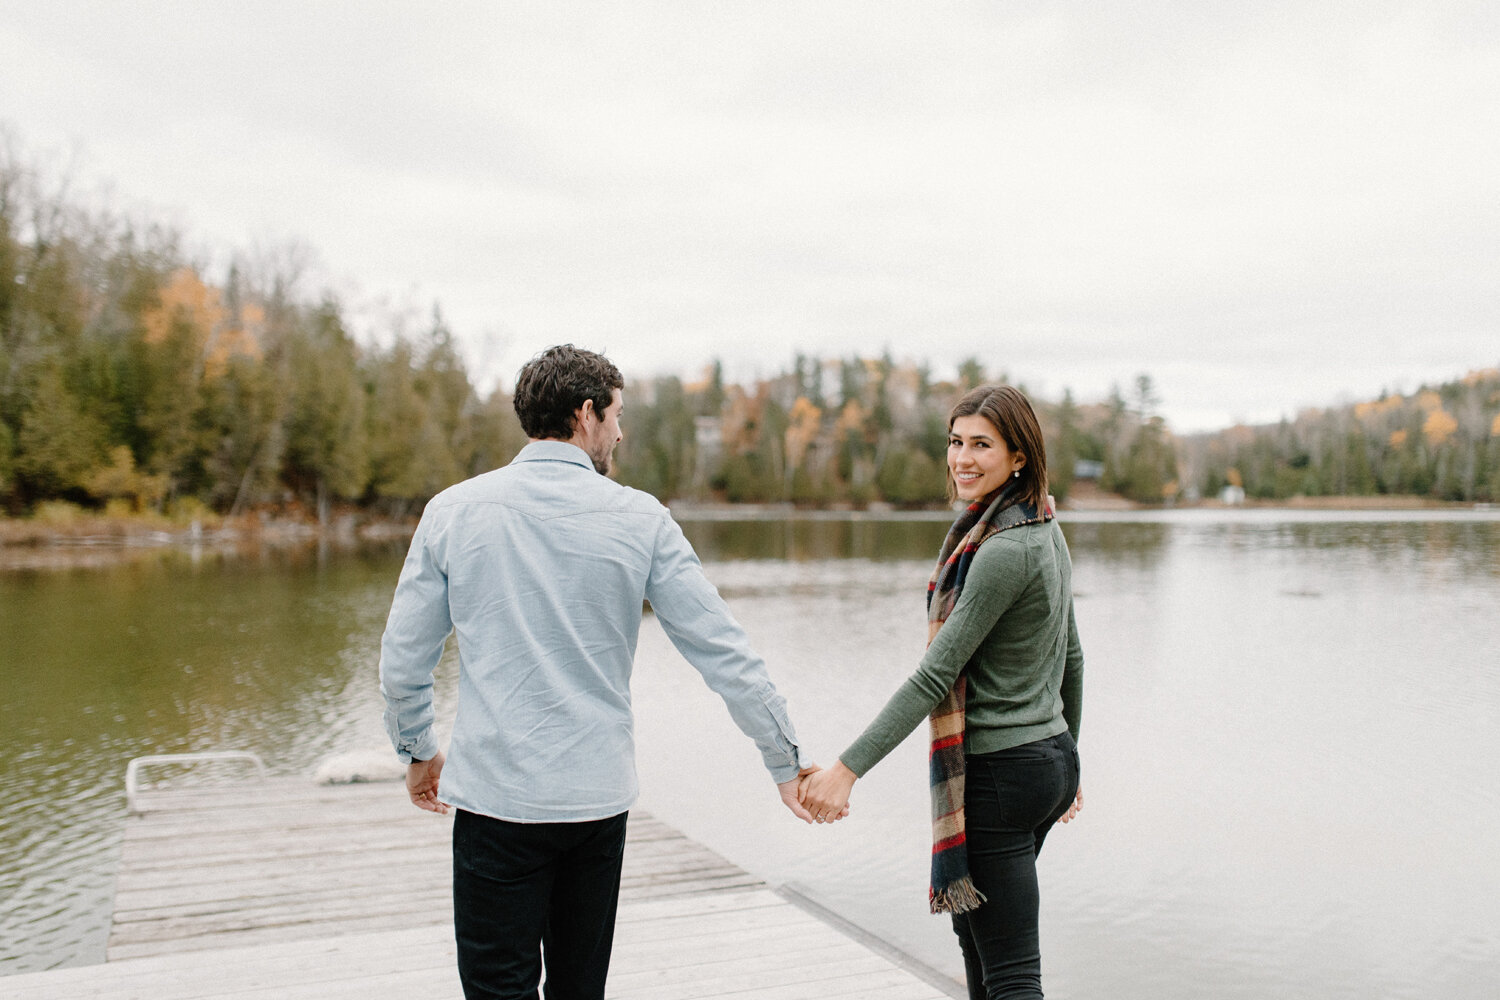  During this autumn engagement session in Quebec, Canada, Chelsea Mason Photography captures this engaged couple holding hands while smiling and walking on a pier on a moody overcast day. Moody overcast engagement session, couple walking hand-in-hand